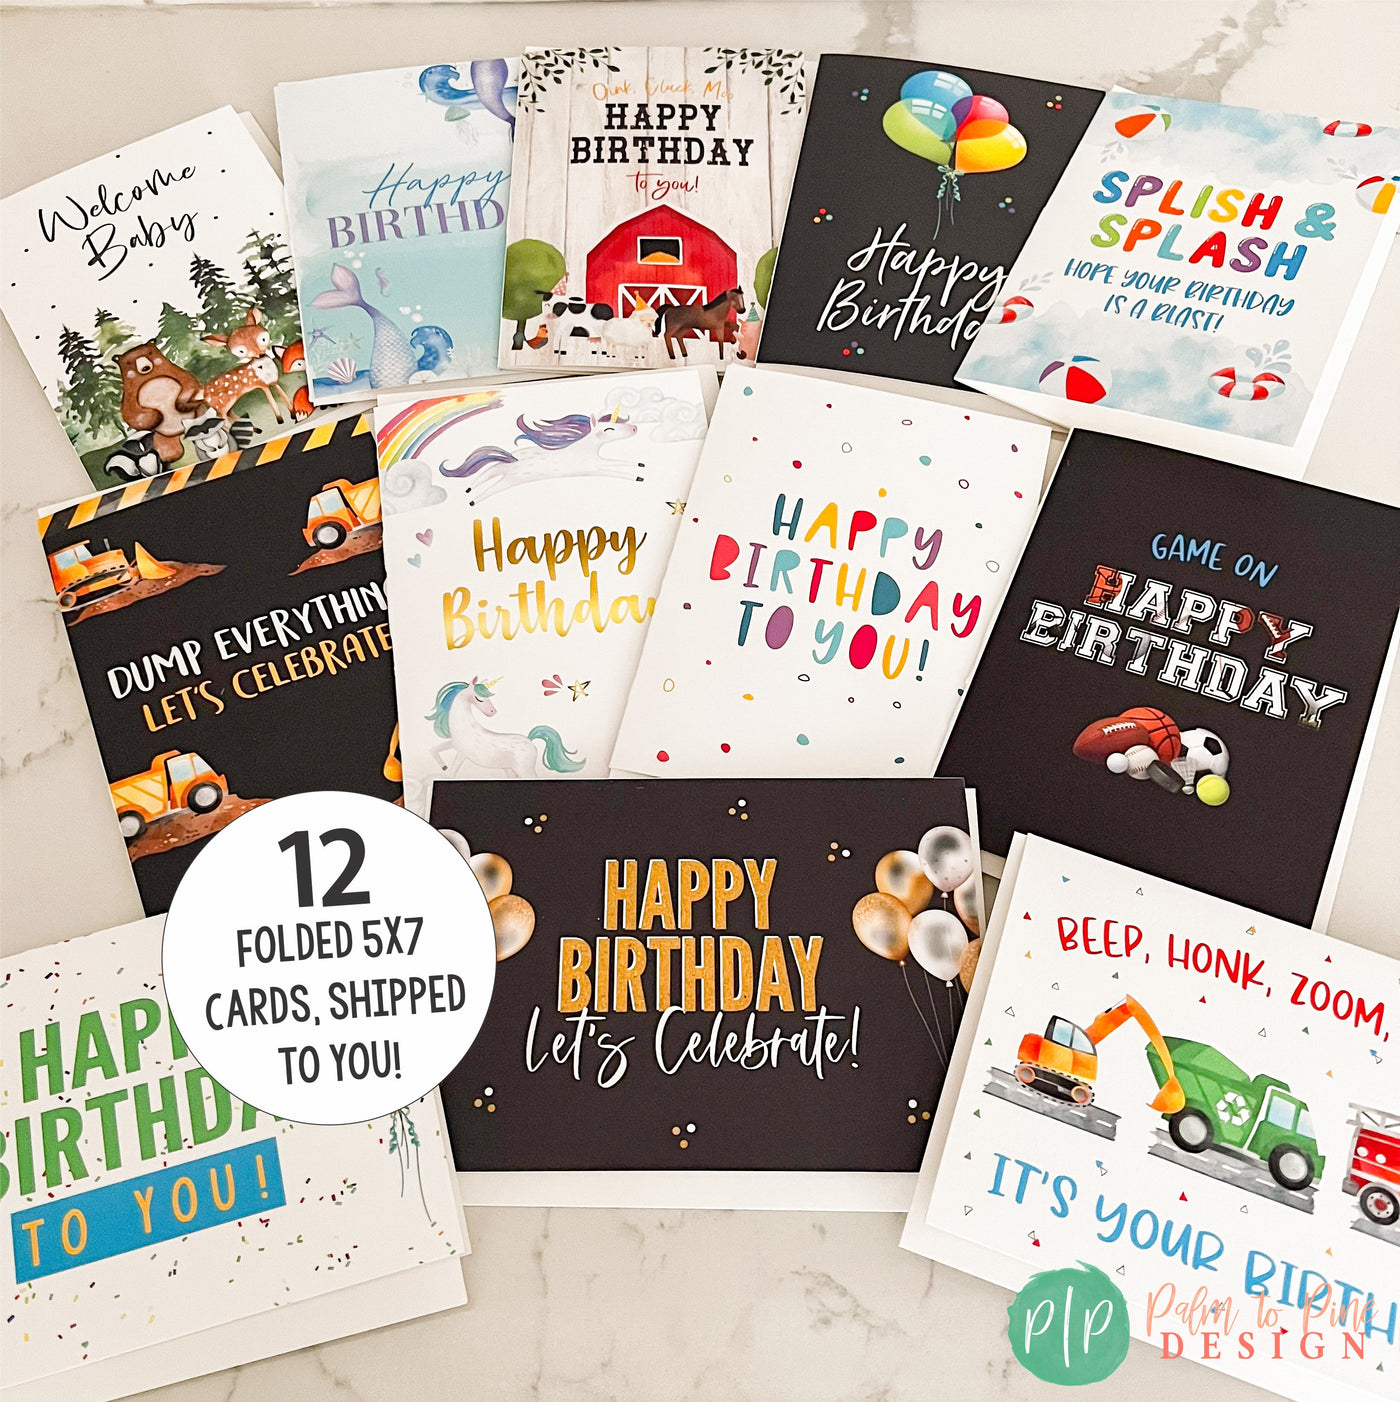 Variety Pack Birthday Greeting Cards, Birthday Card Assortment, Custom birthday cards for adults and kids, Celebration Greeting Card Pack A7